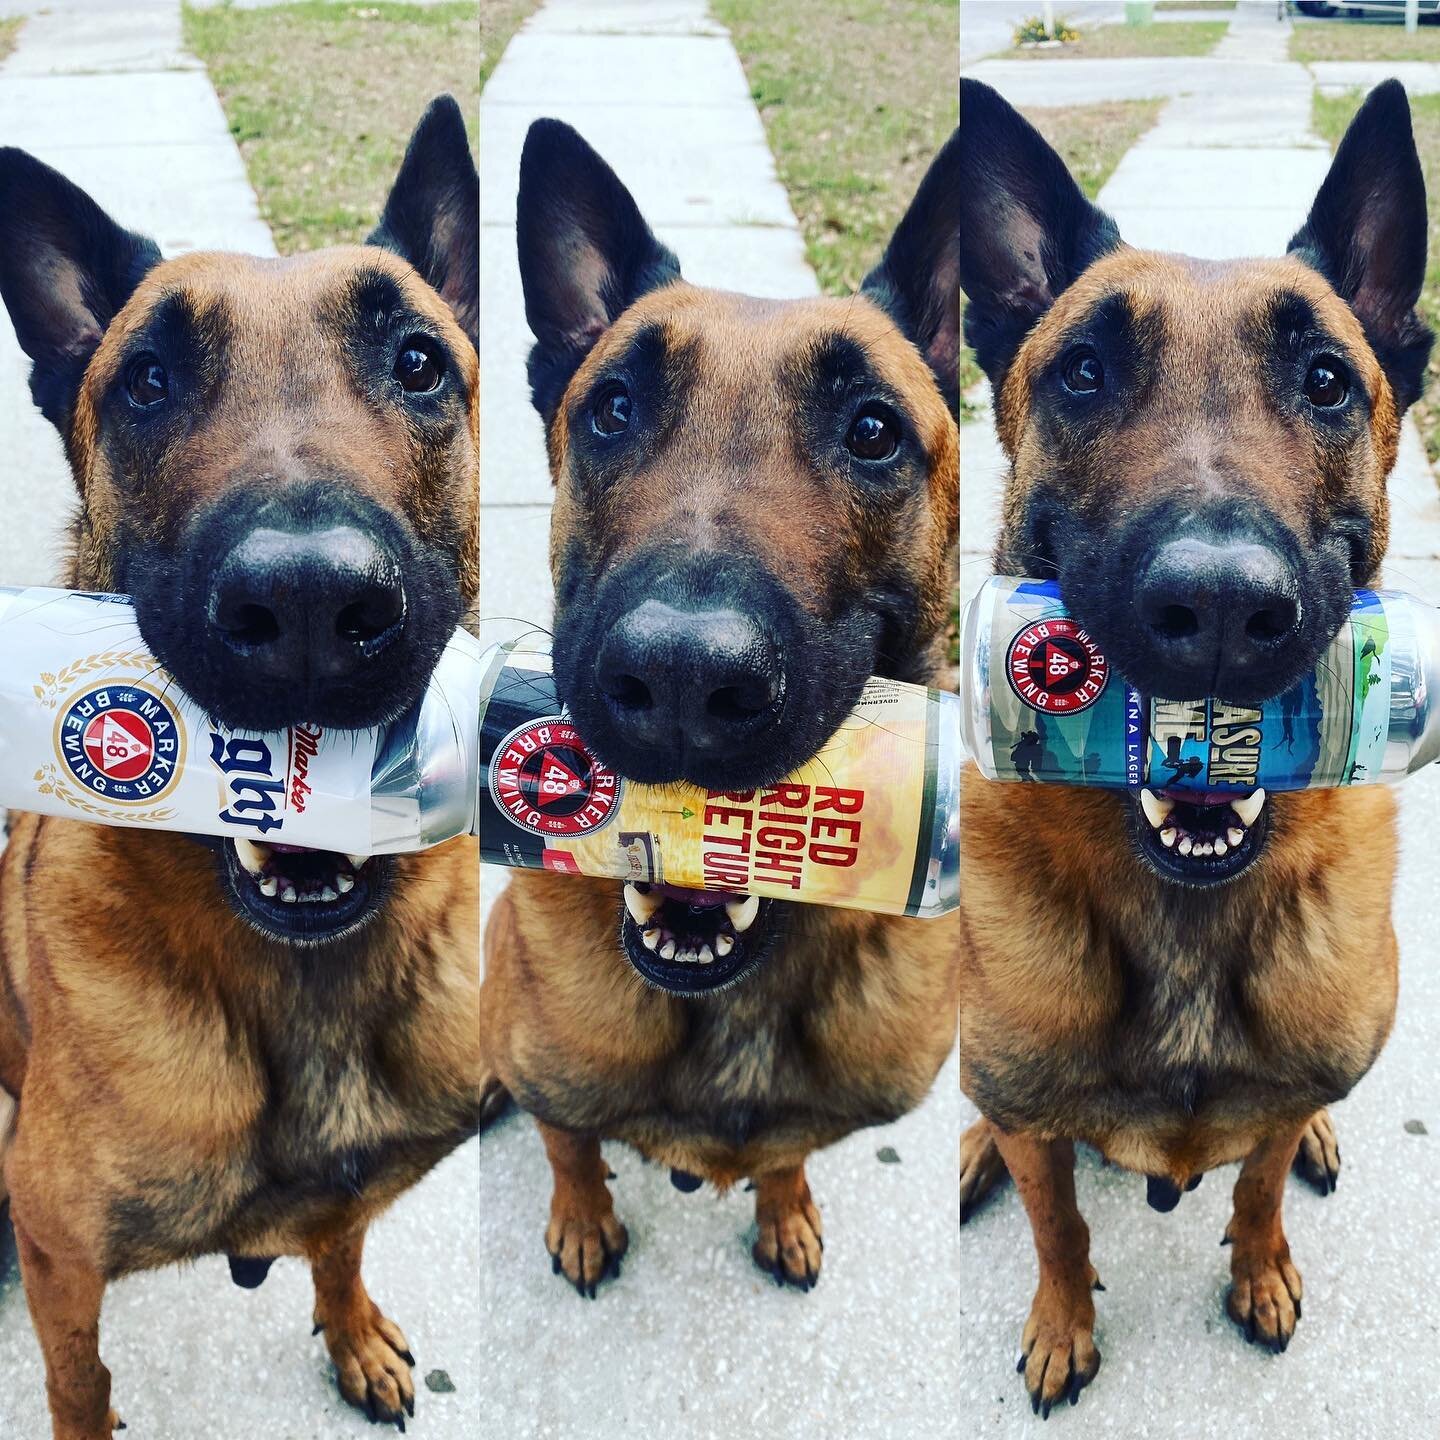 Even Cajun knows good beer comes from the folks @marker48brewing The goodest beer (empty cans only) for the goodest boy. Will model for craft beer 🍺#craft #craftbeer #belgianmalinois #fetch #can #lager #redale